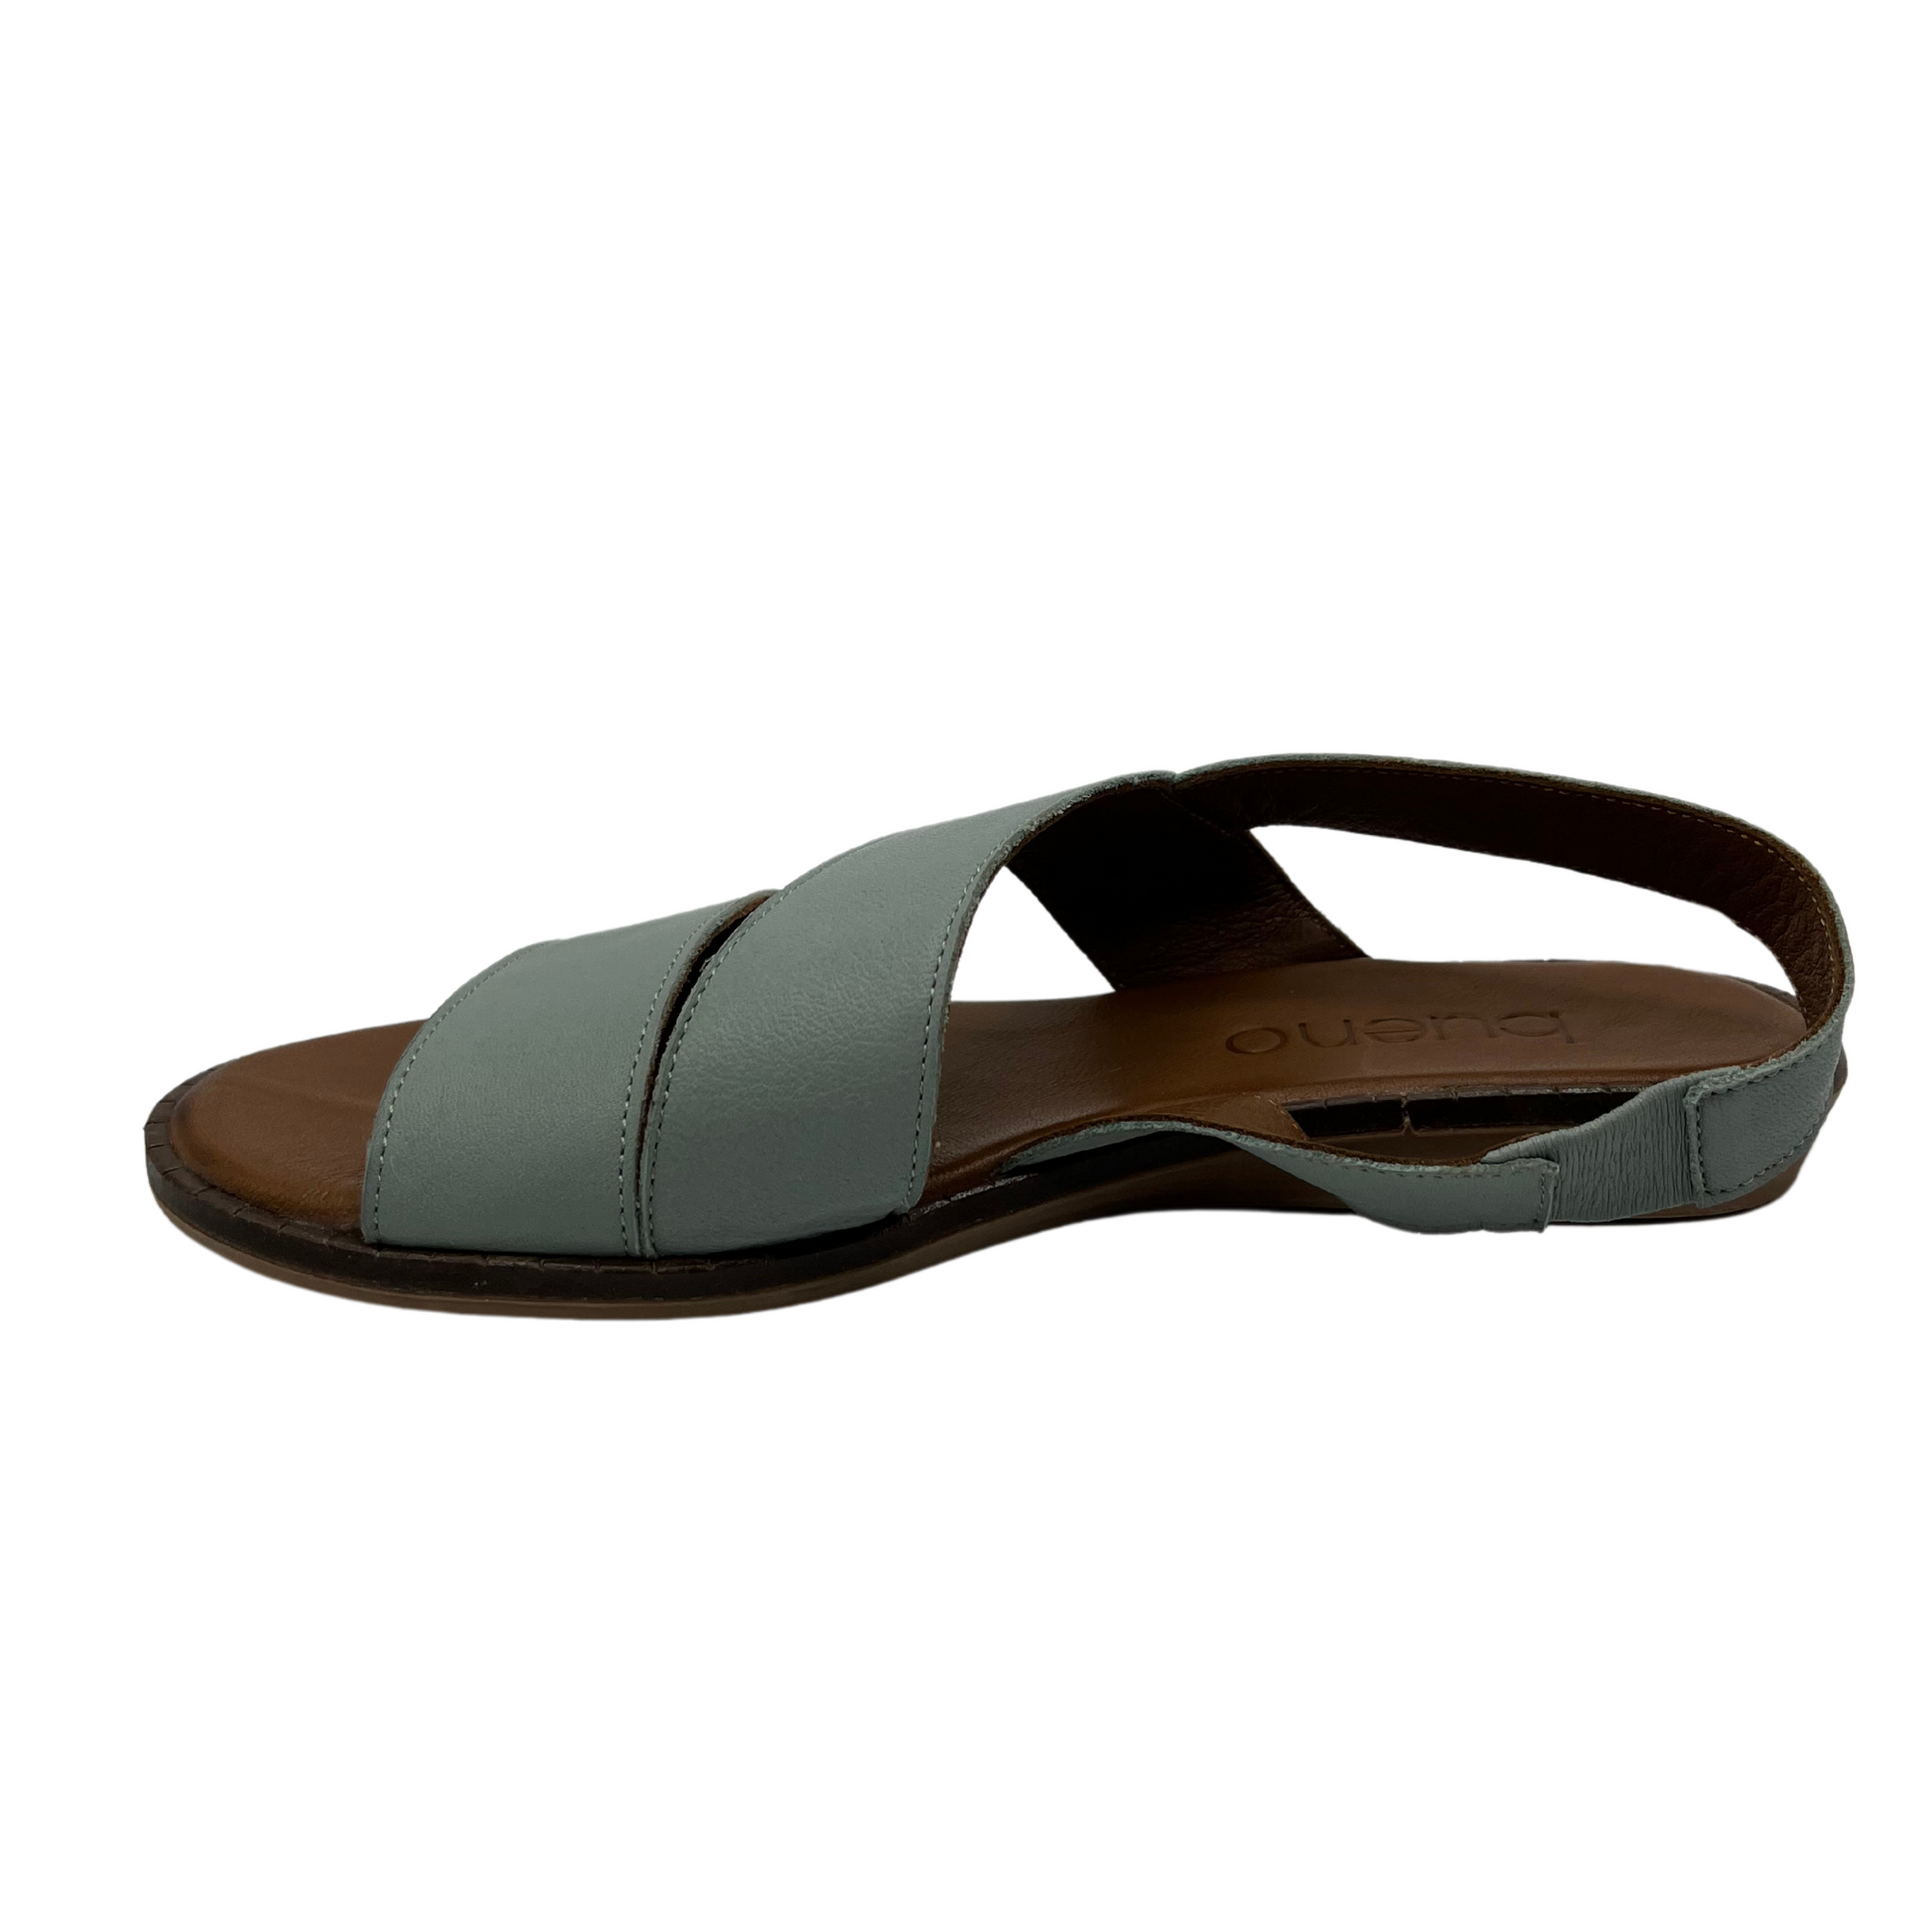 Left facing view of pale green leather sandal with slight wedge heel, rounded tow and slingback strap